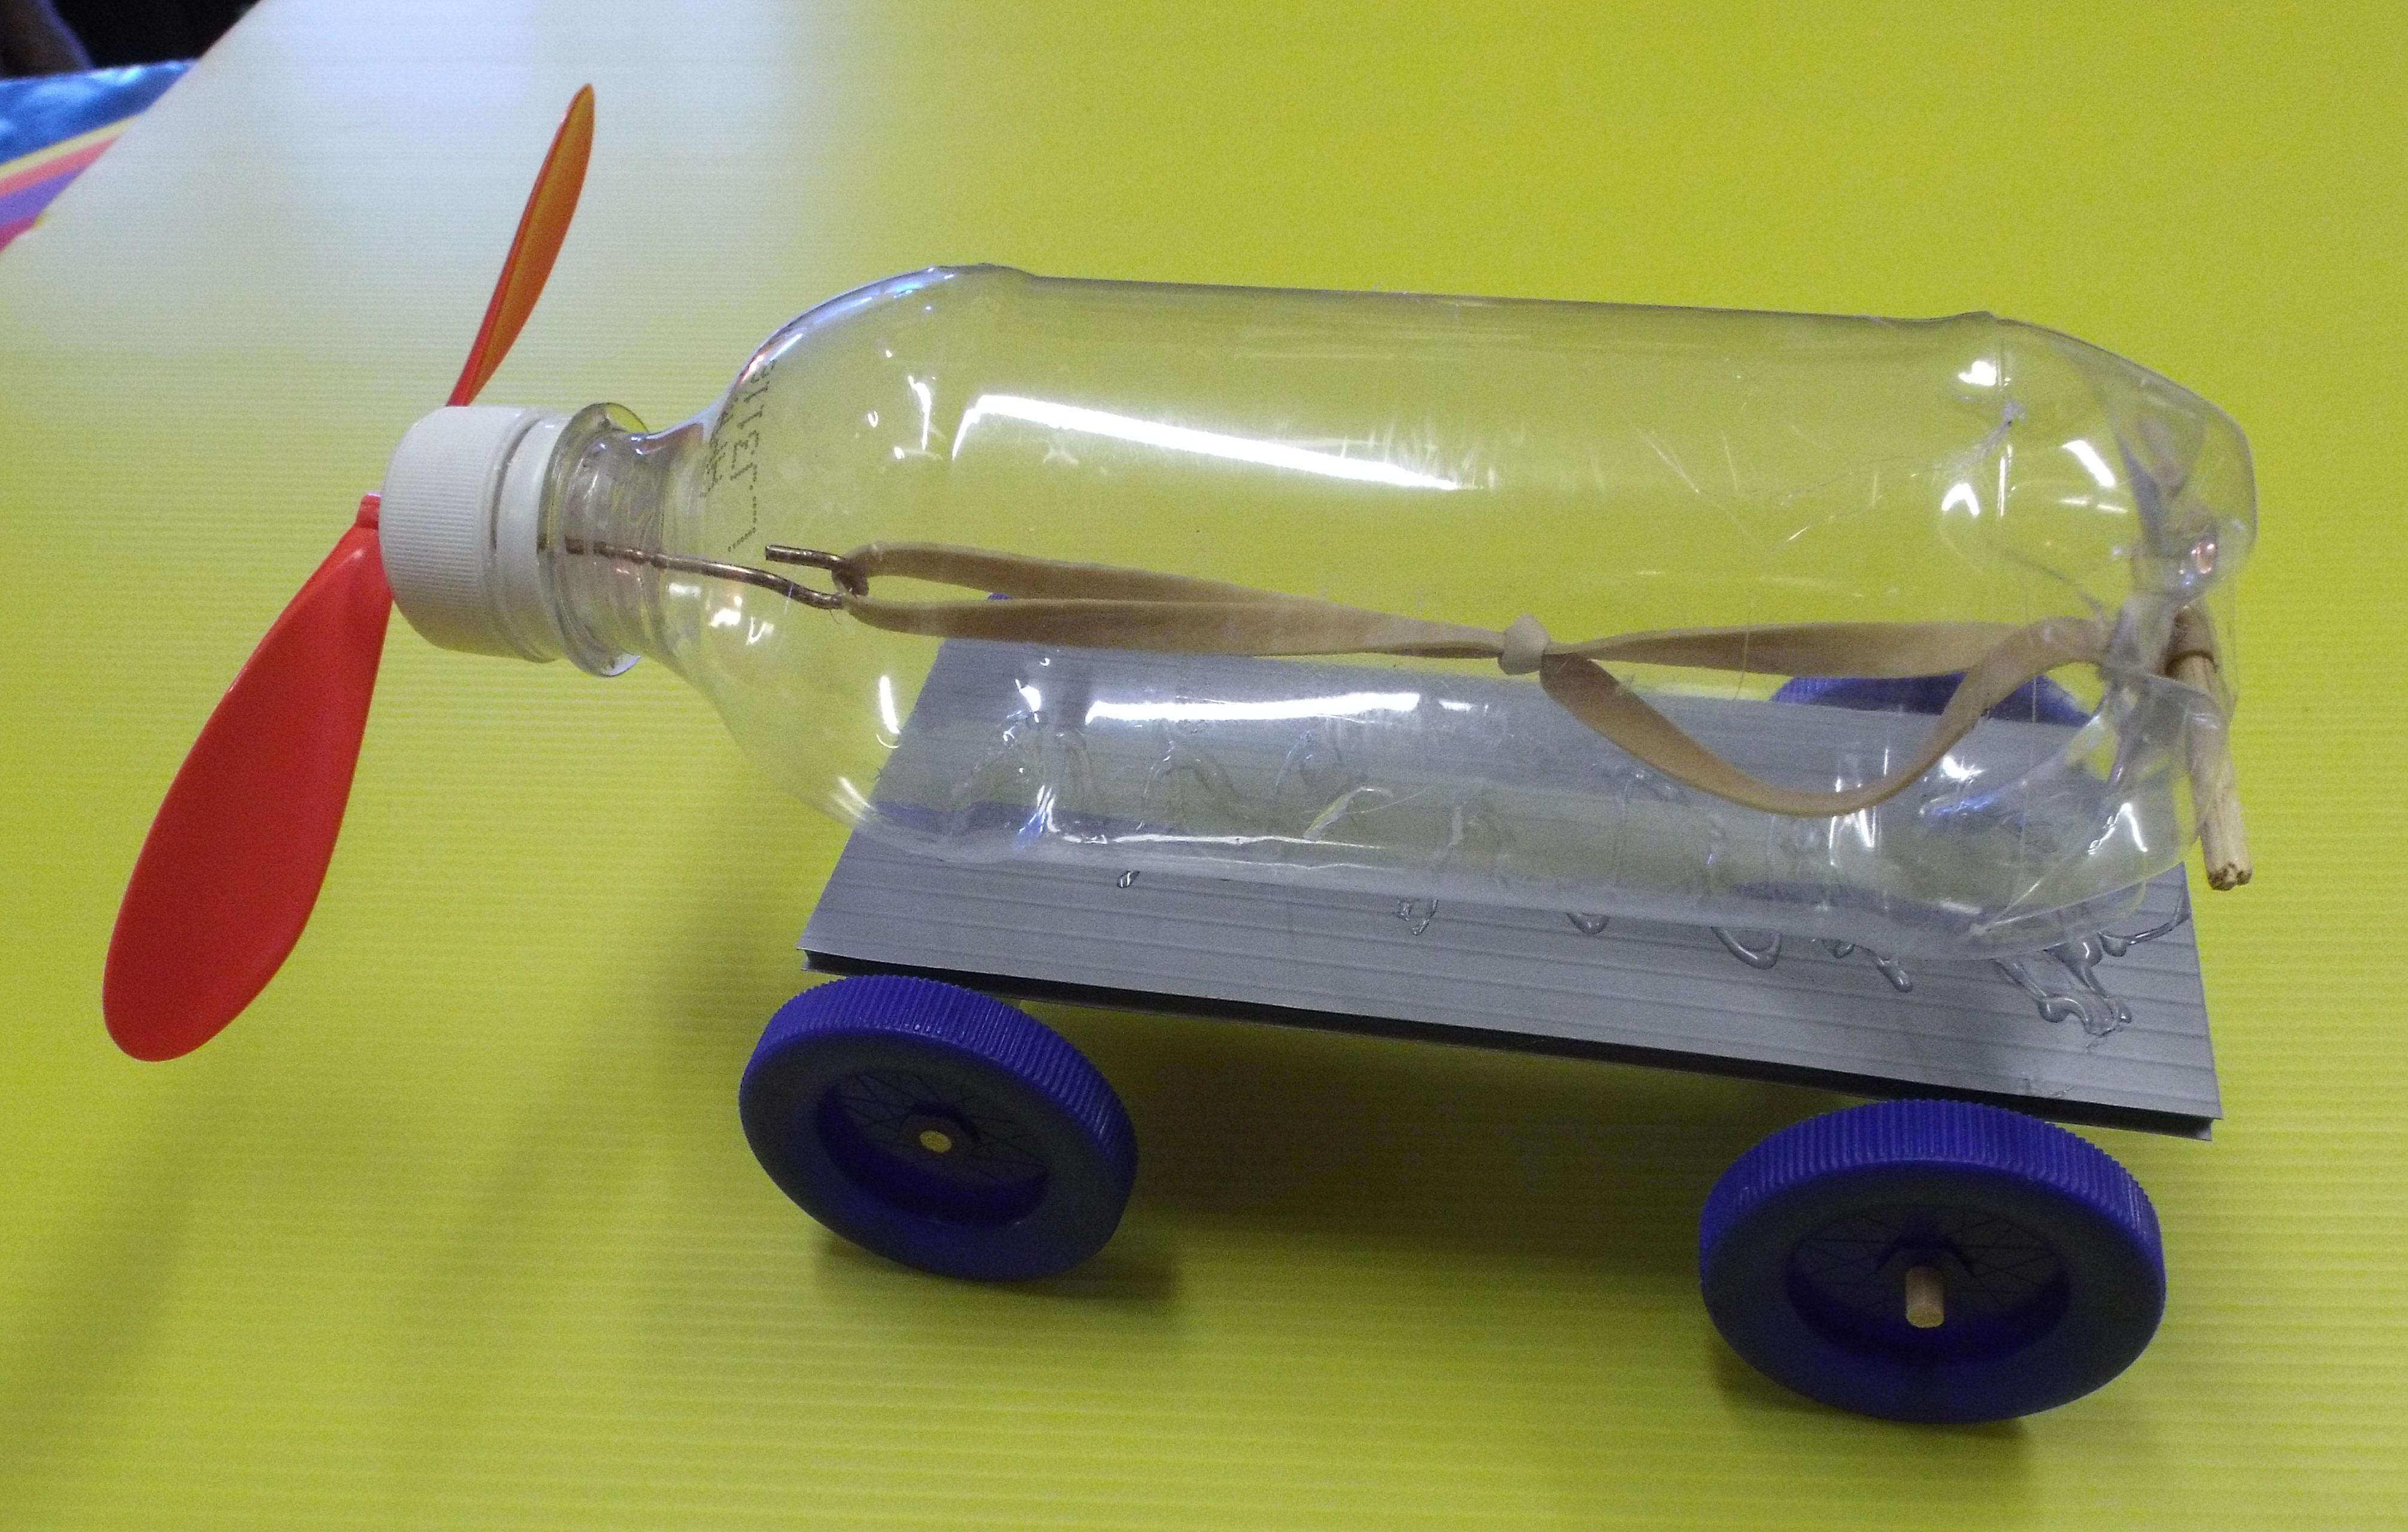 How To Make A Solar Powered Plastic Bottle Toy Car | Caroldoey